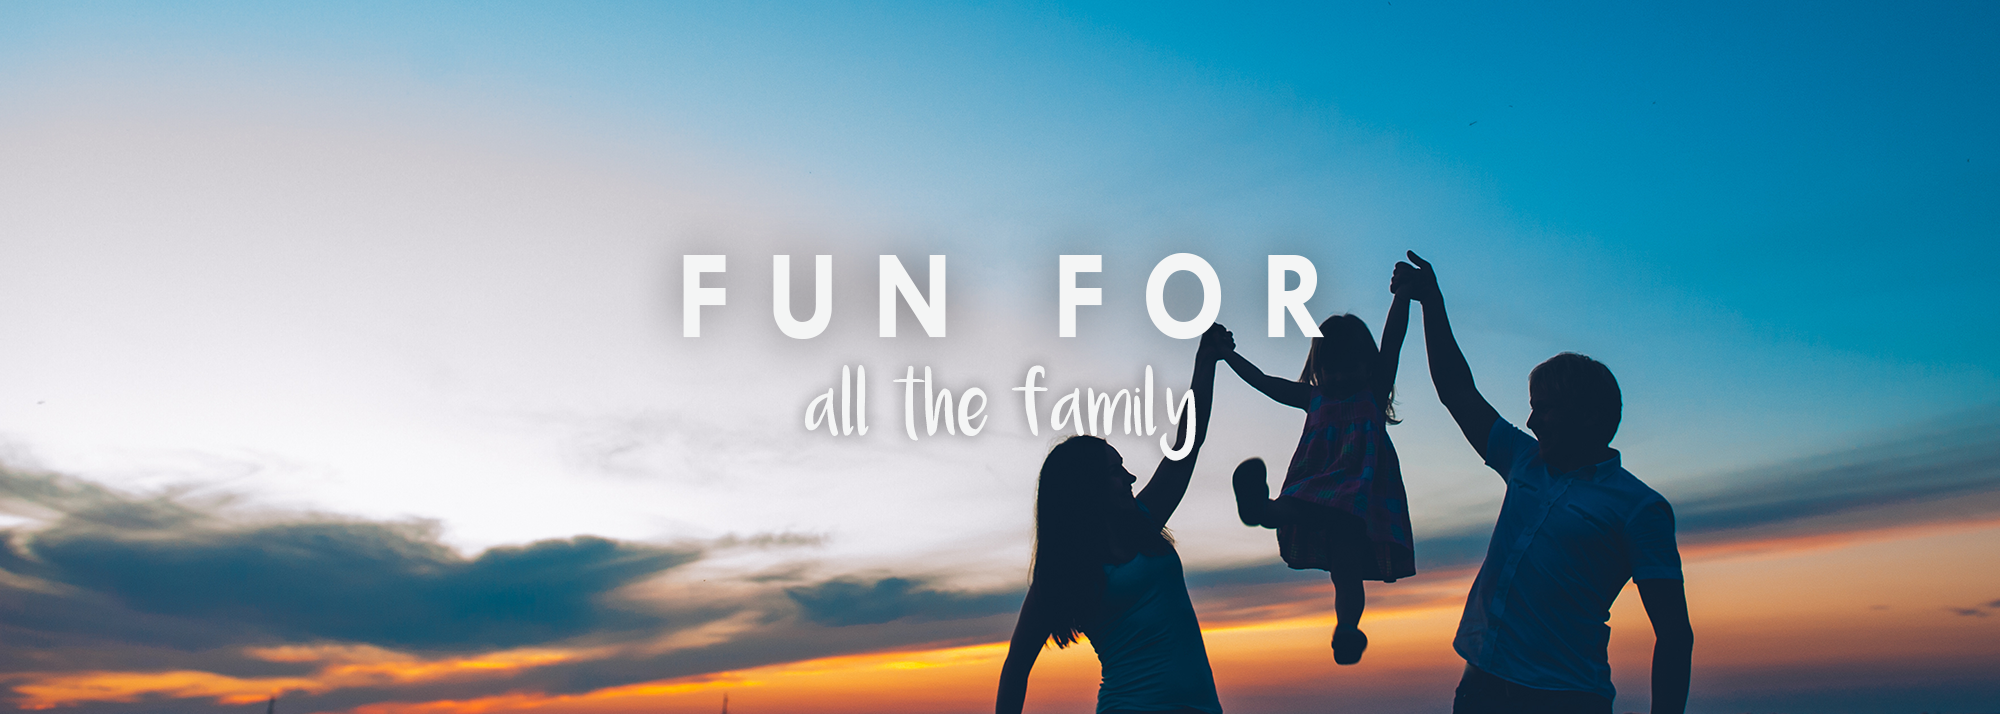 Fun For All The Family.